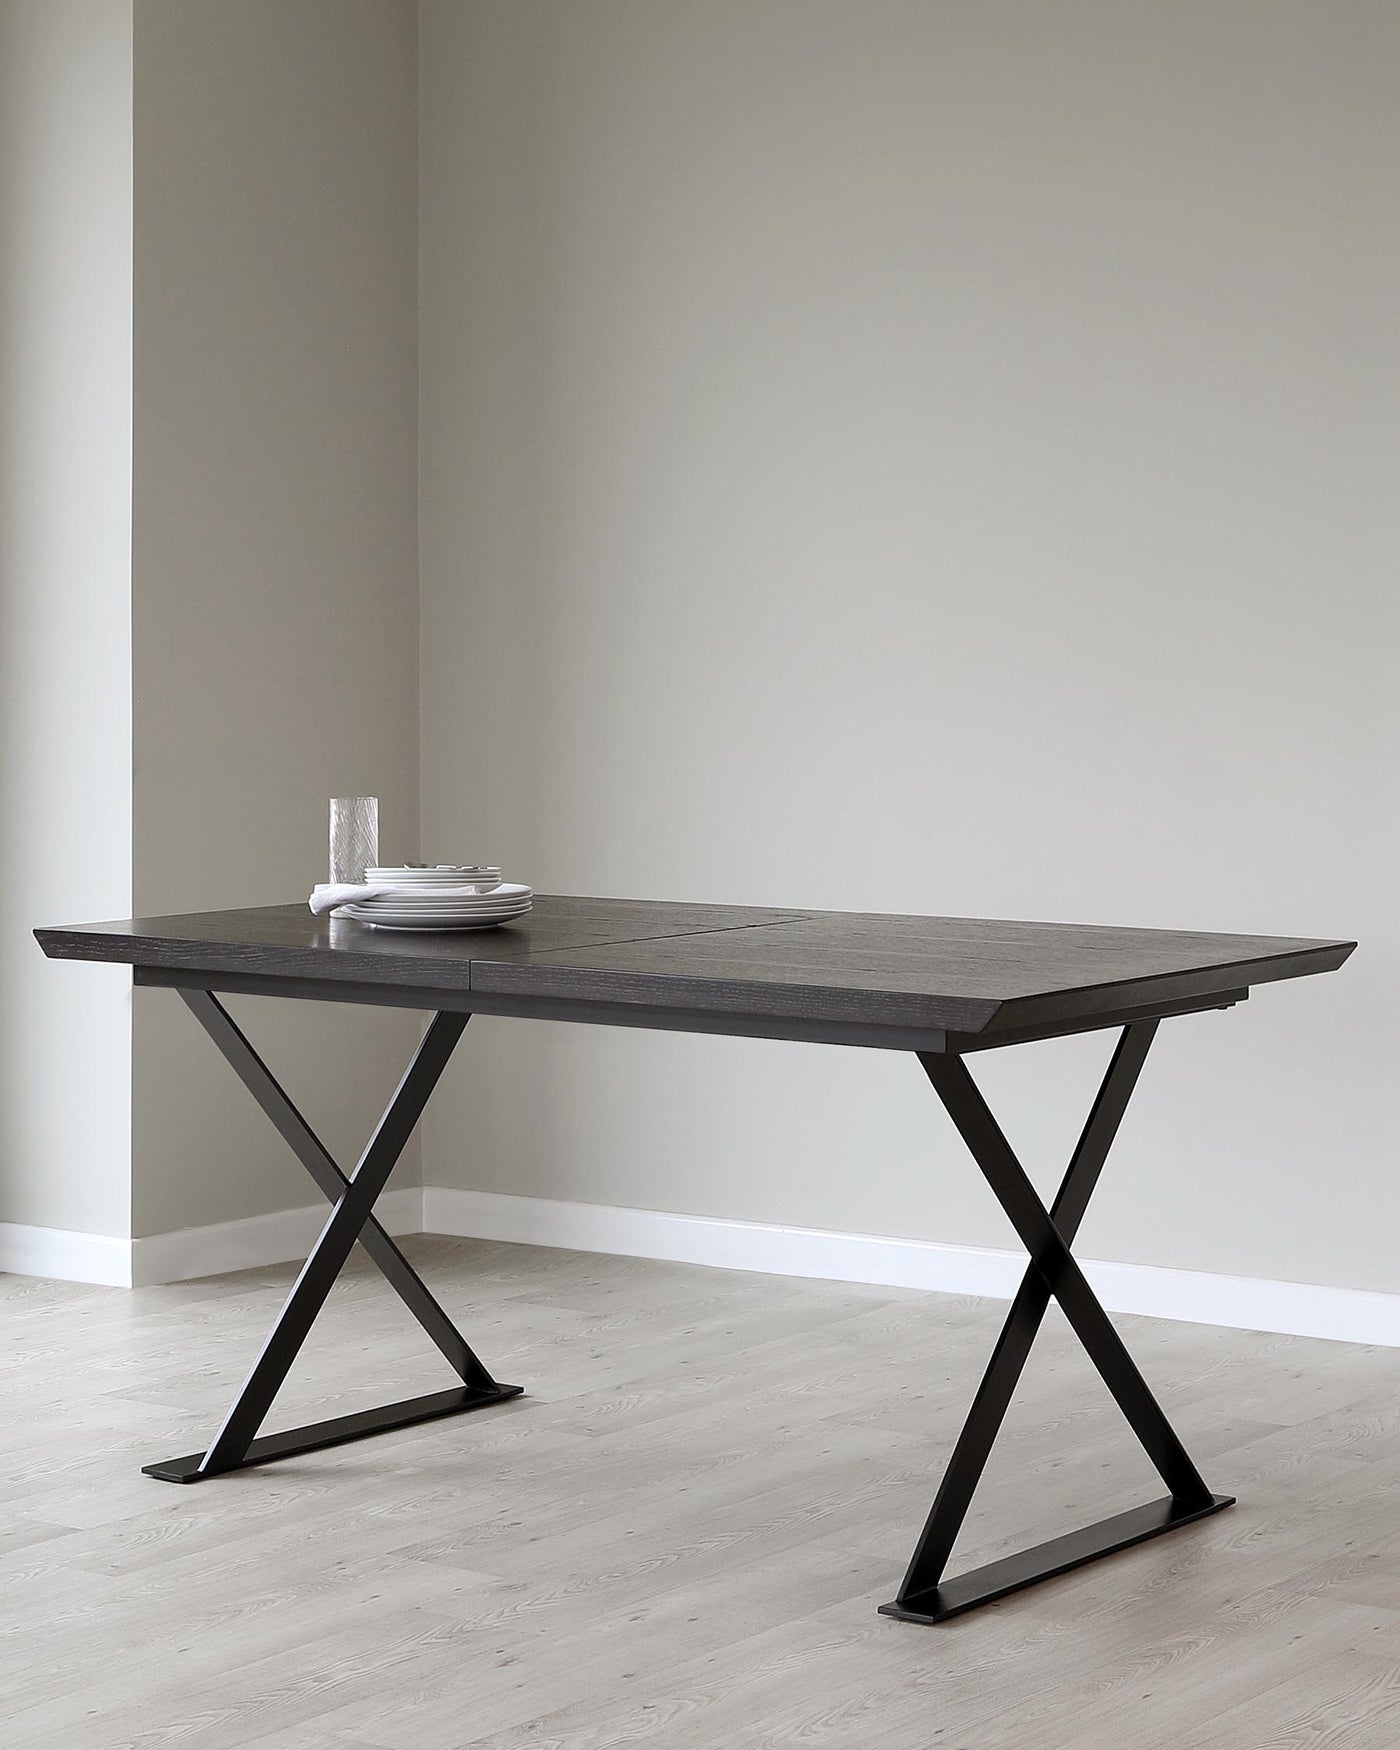 Modern minimalist dining table featuring a dark wood finish tabletop and sleek, angular black metal legs forming an X shape. The table is styled with a simple set of white plates, showcasing its clean lines and contemporary design.